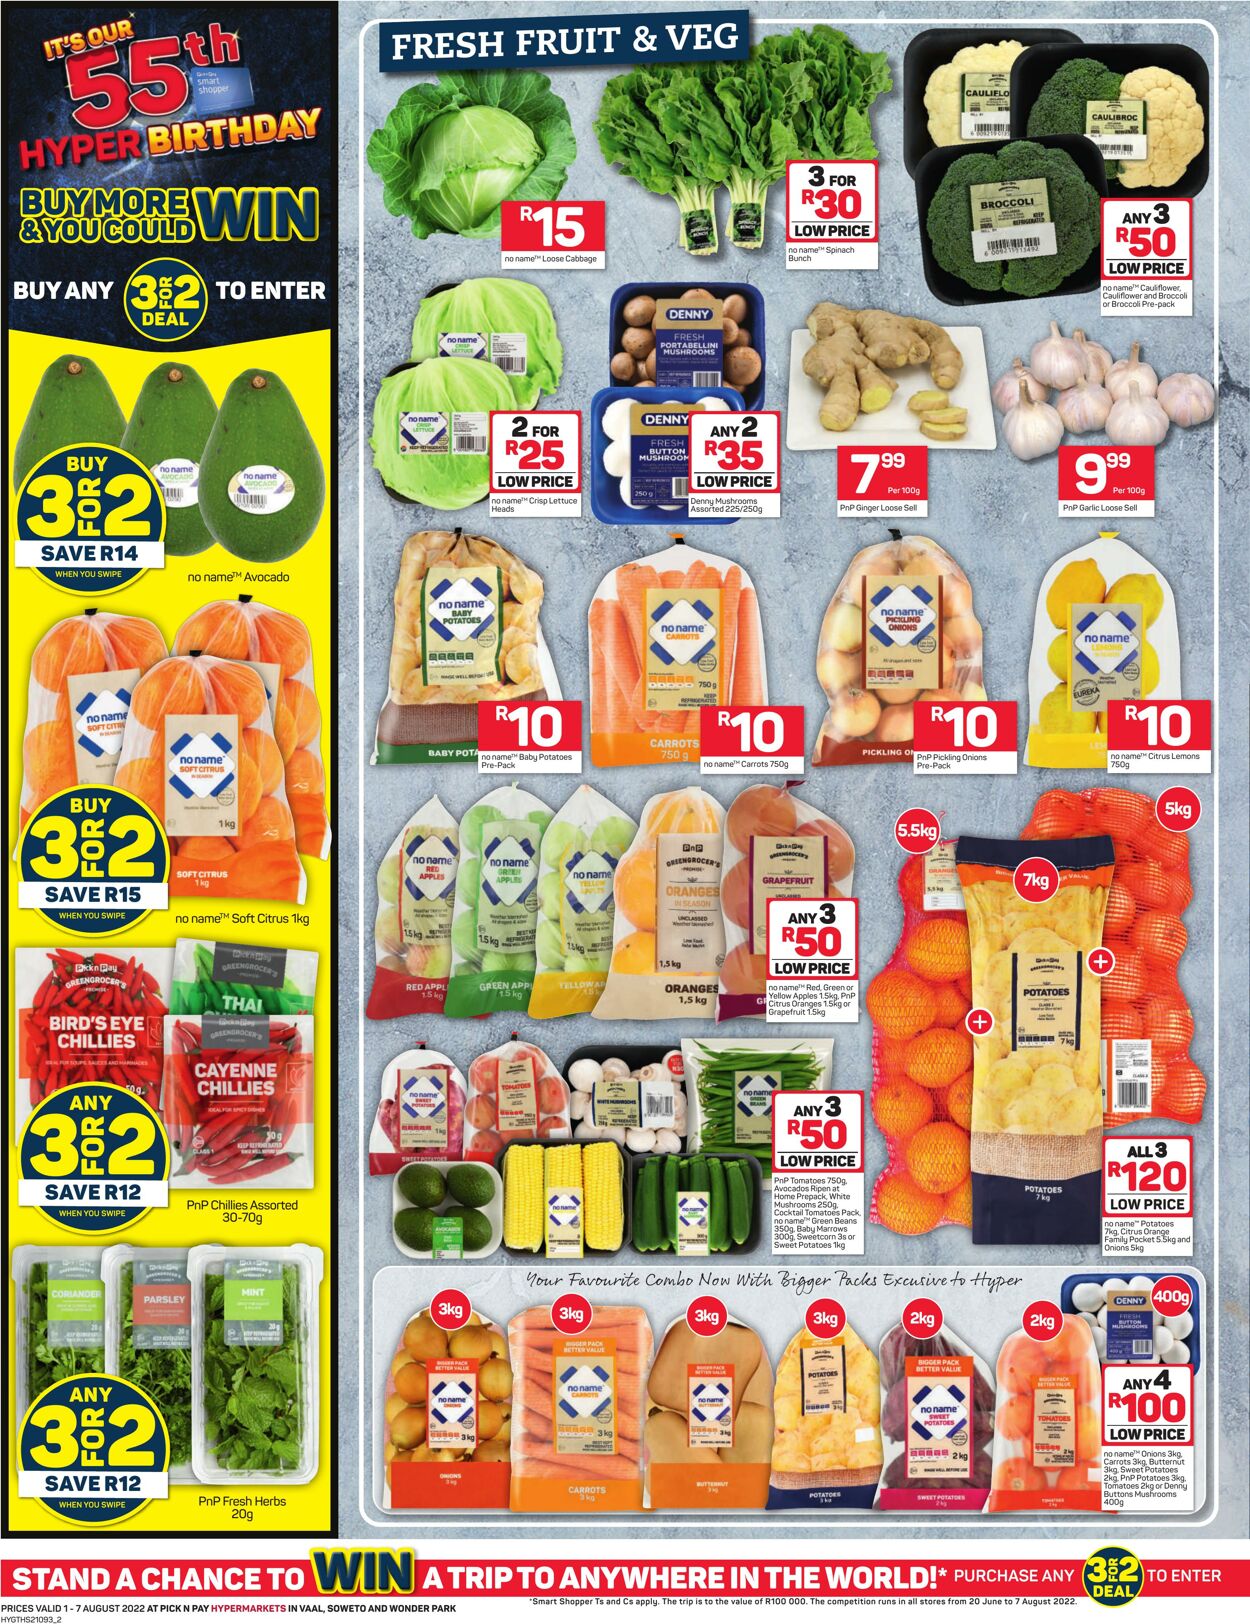 Special Pick n Pay 01.08.2022 - 07.08.2022